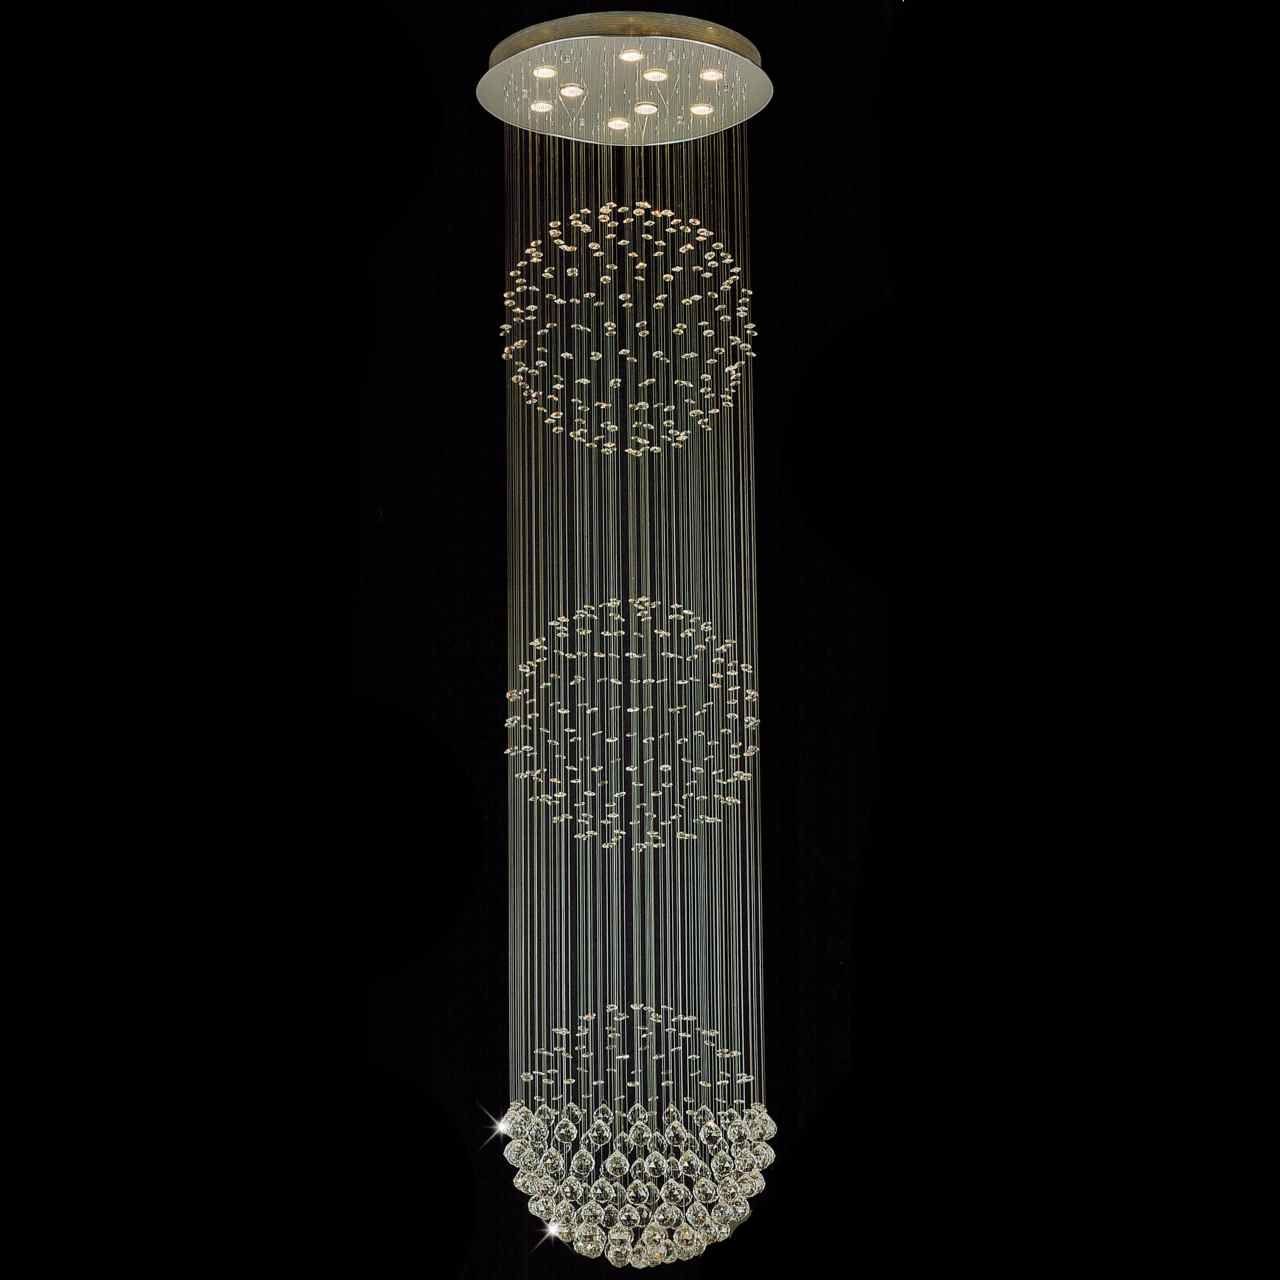 Brizzo Lighting Stores Double Sphere Modern Foyer Crystal Intended For Chandelier Mirror (View 12 of 15)